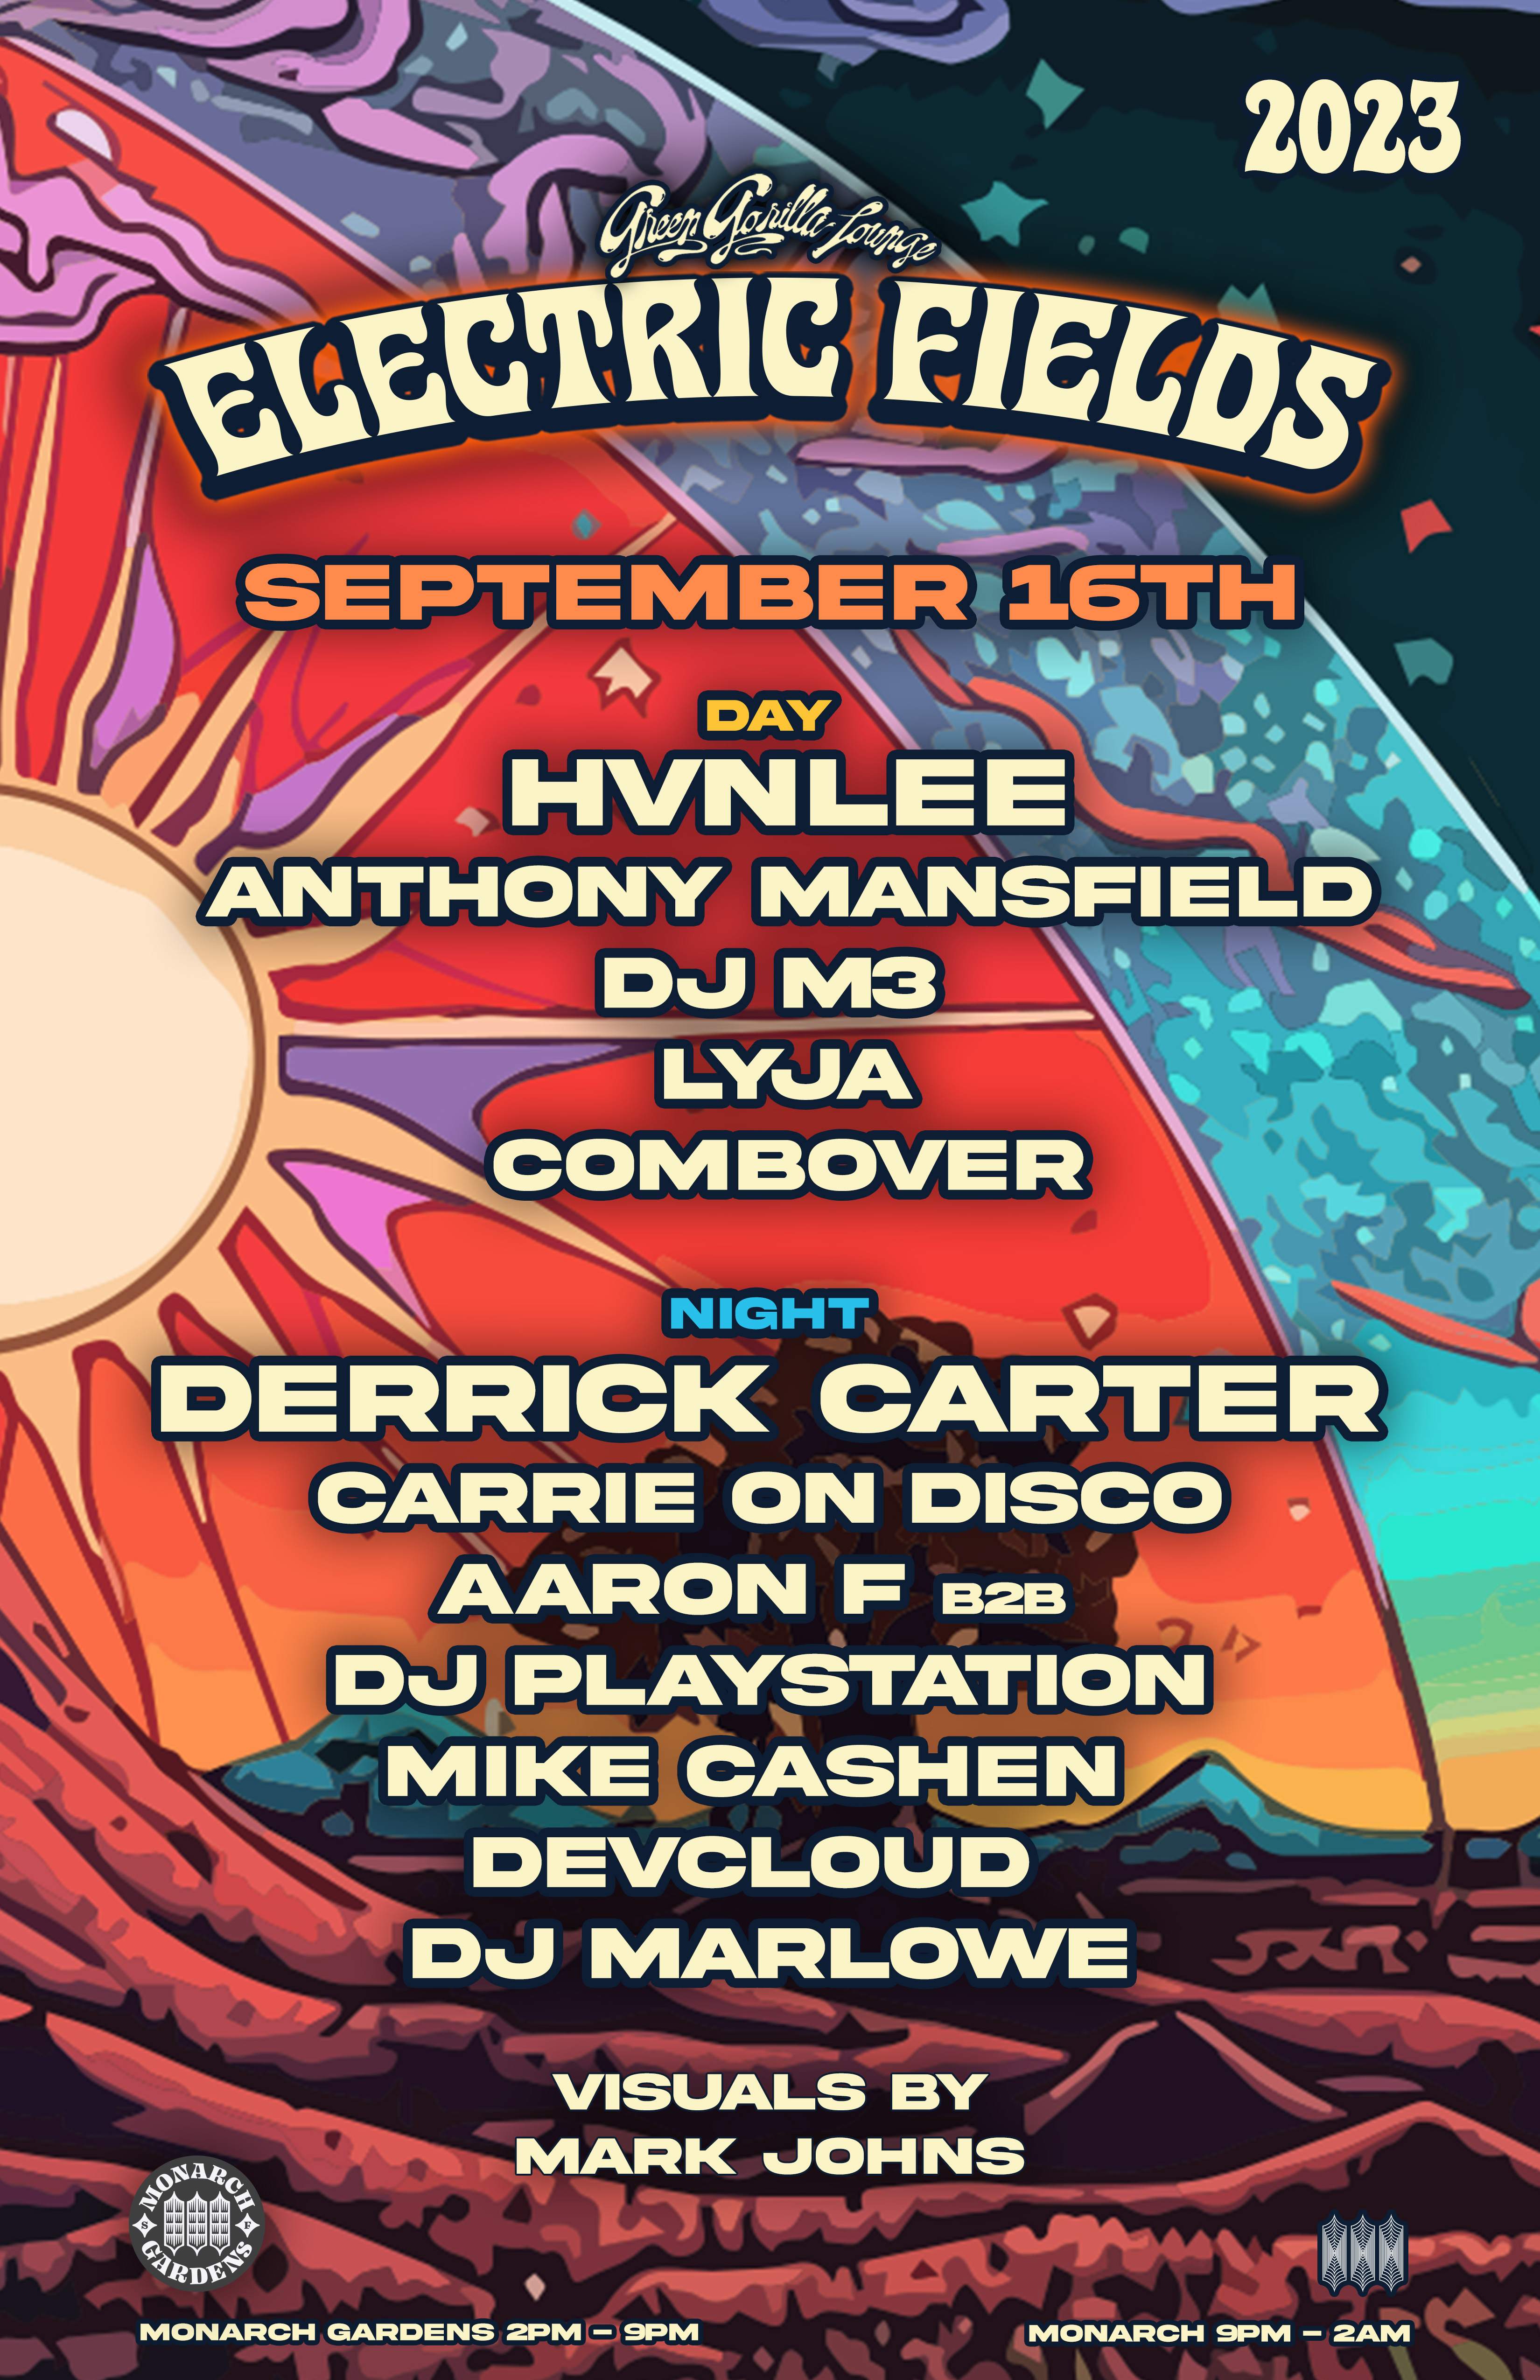 Electric Fields San Francisco with Derrick Carter - HVNLEE - DJ M3 - Anthony Mansfield - フライヤー表